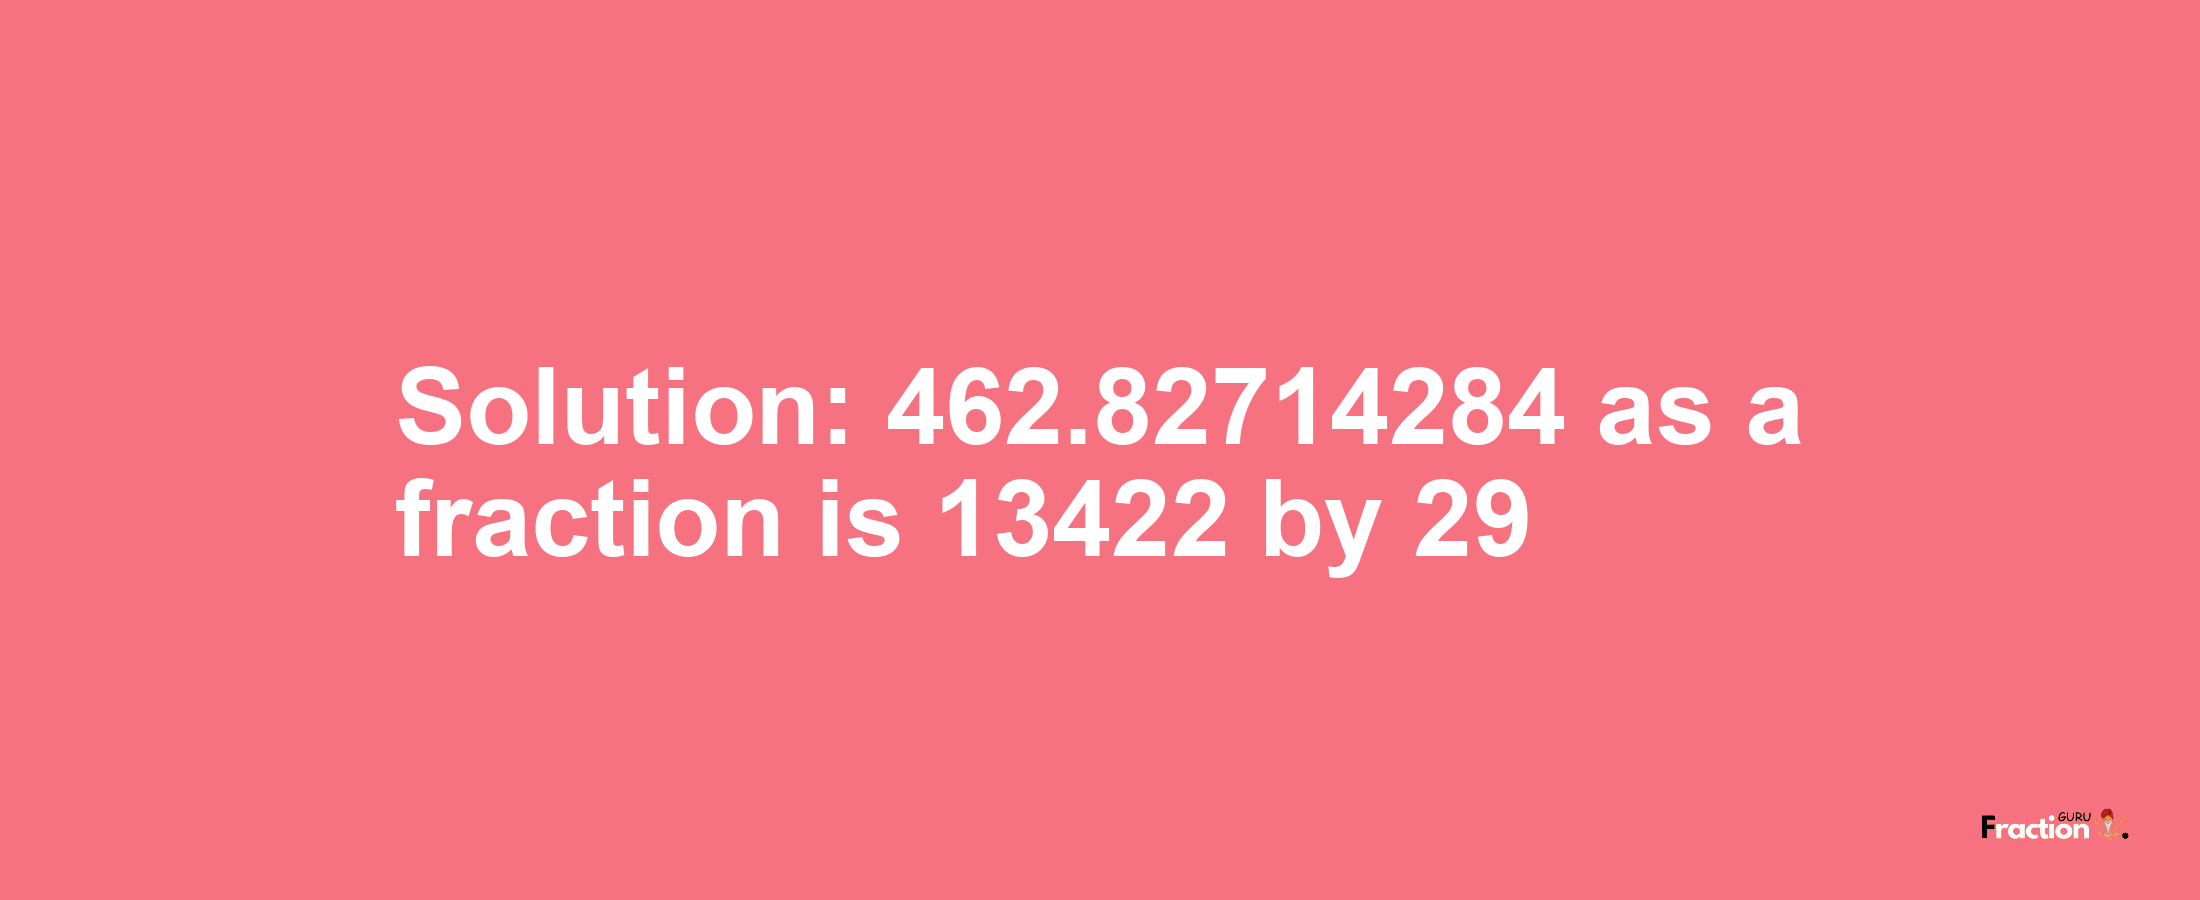 Solution:462.82714284 as a fraction is 13422/29